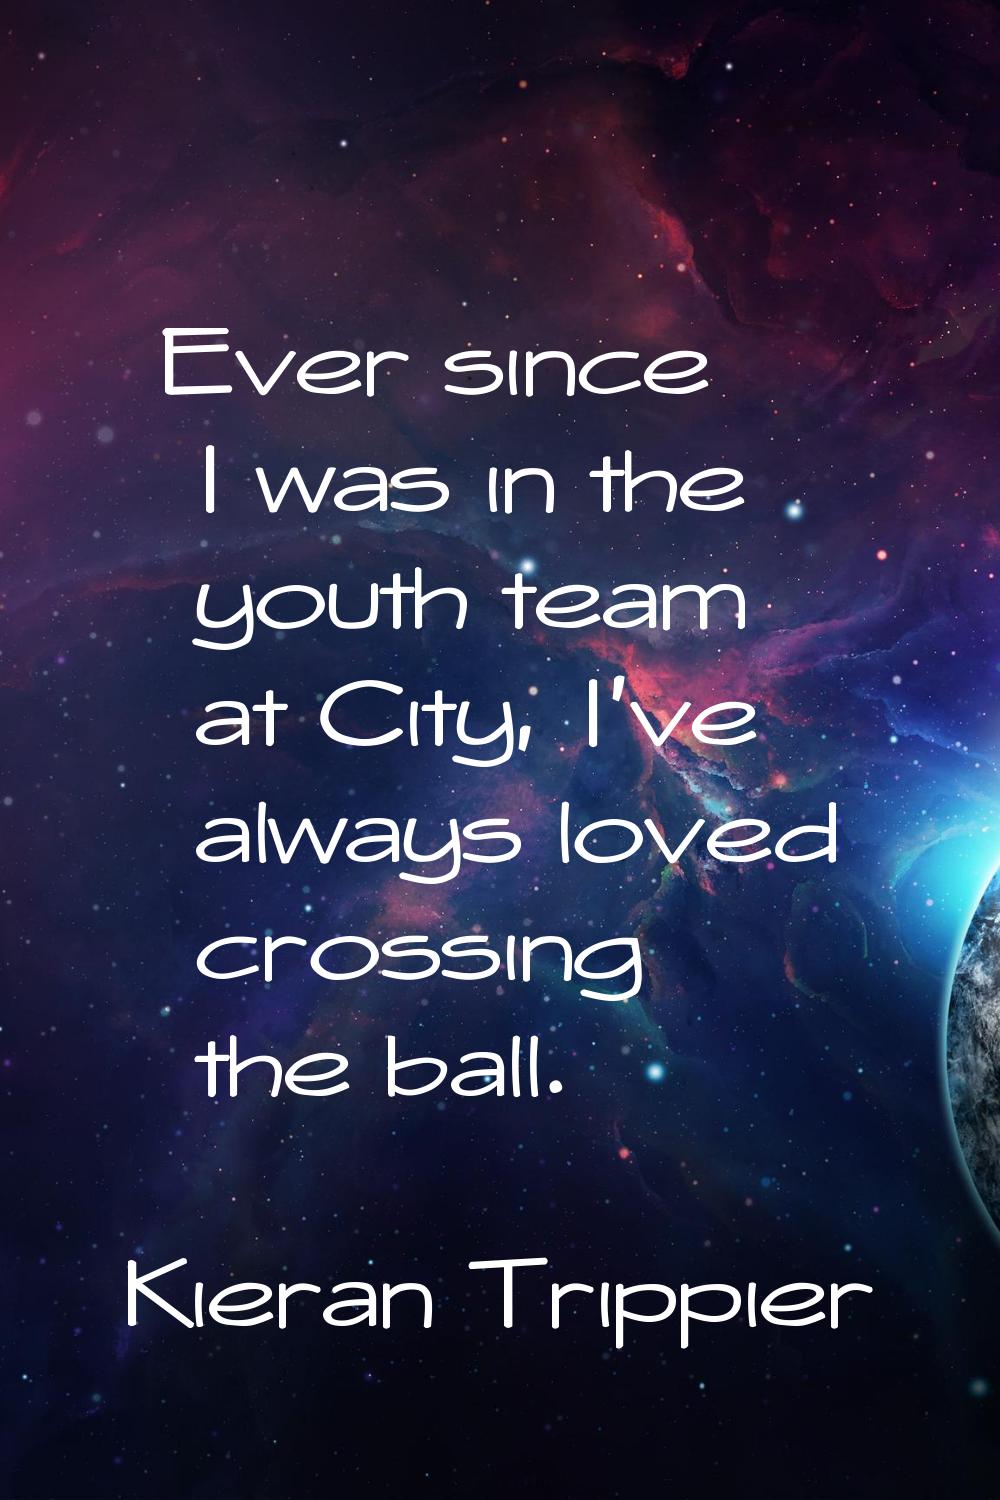 Ever since I was in the youth team at City, I've always loved crossing the ball.